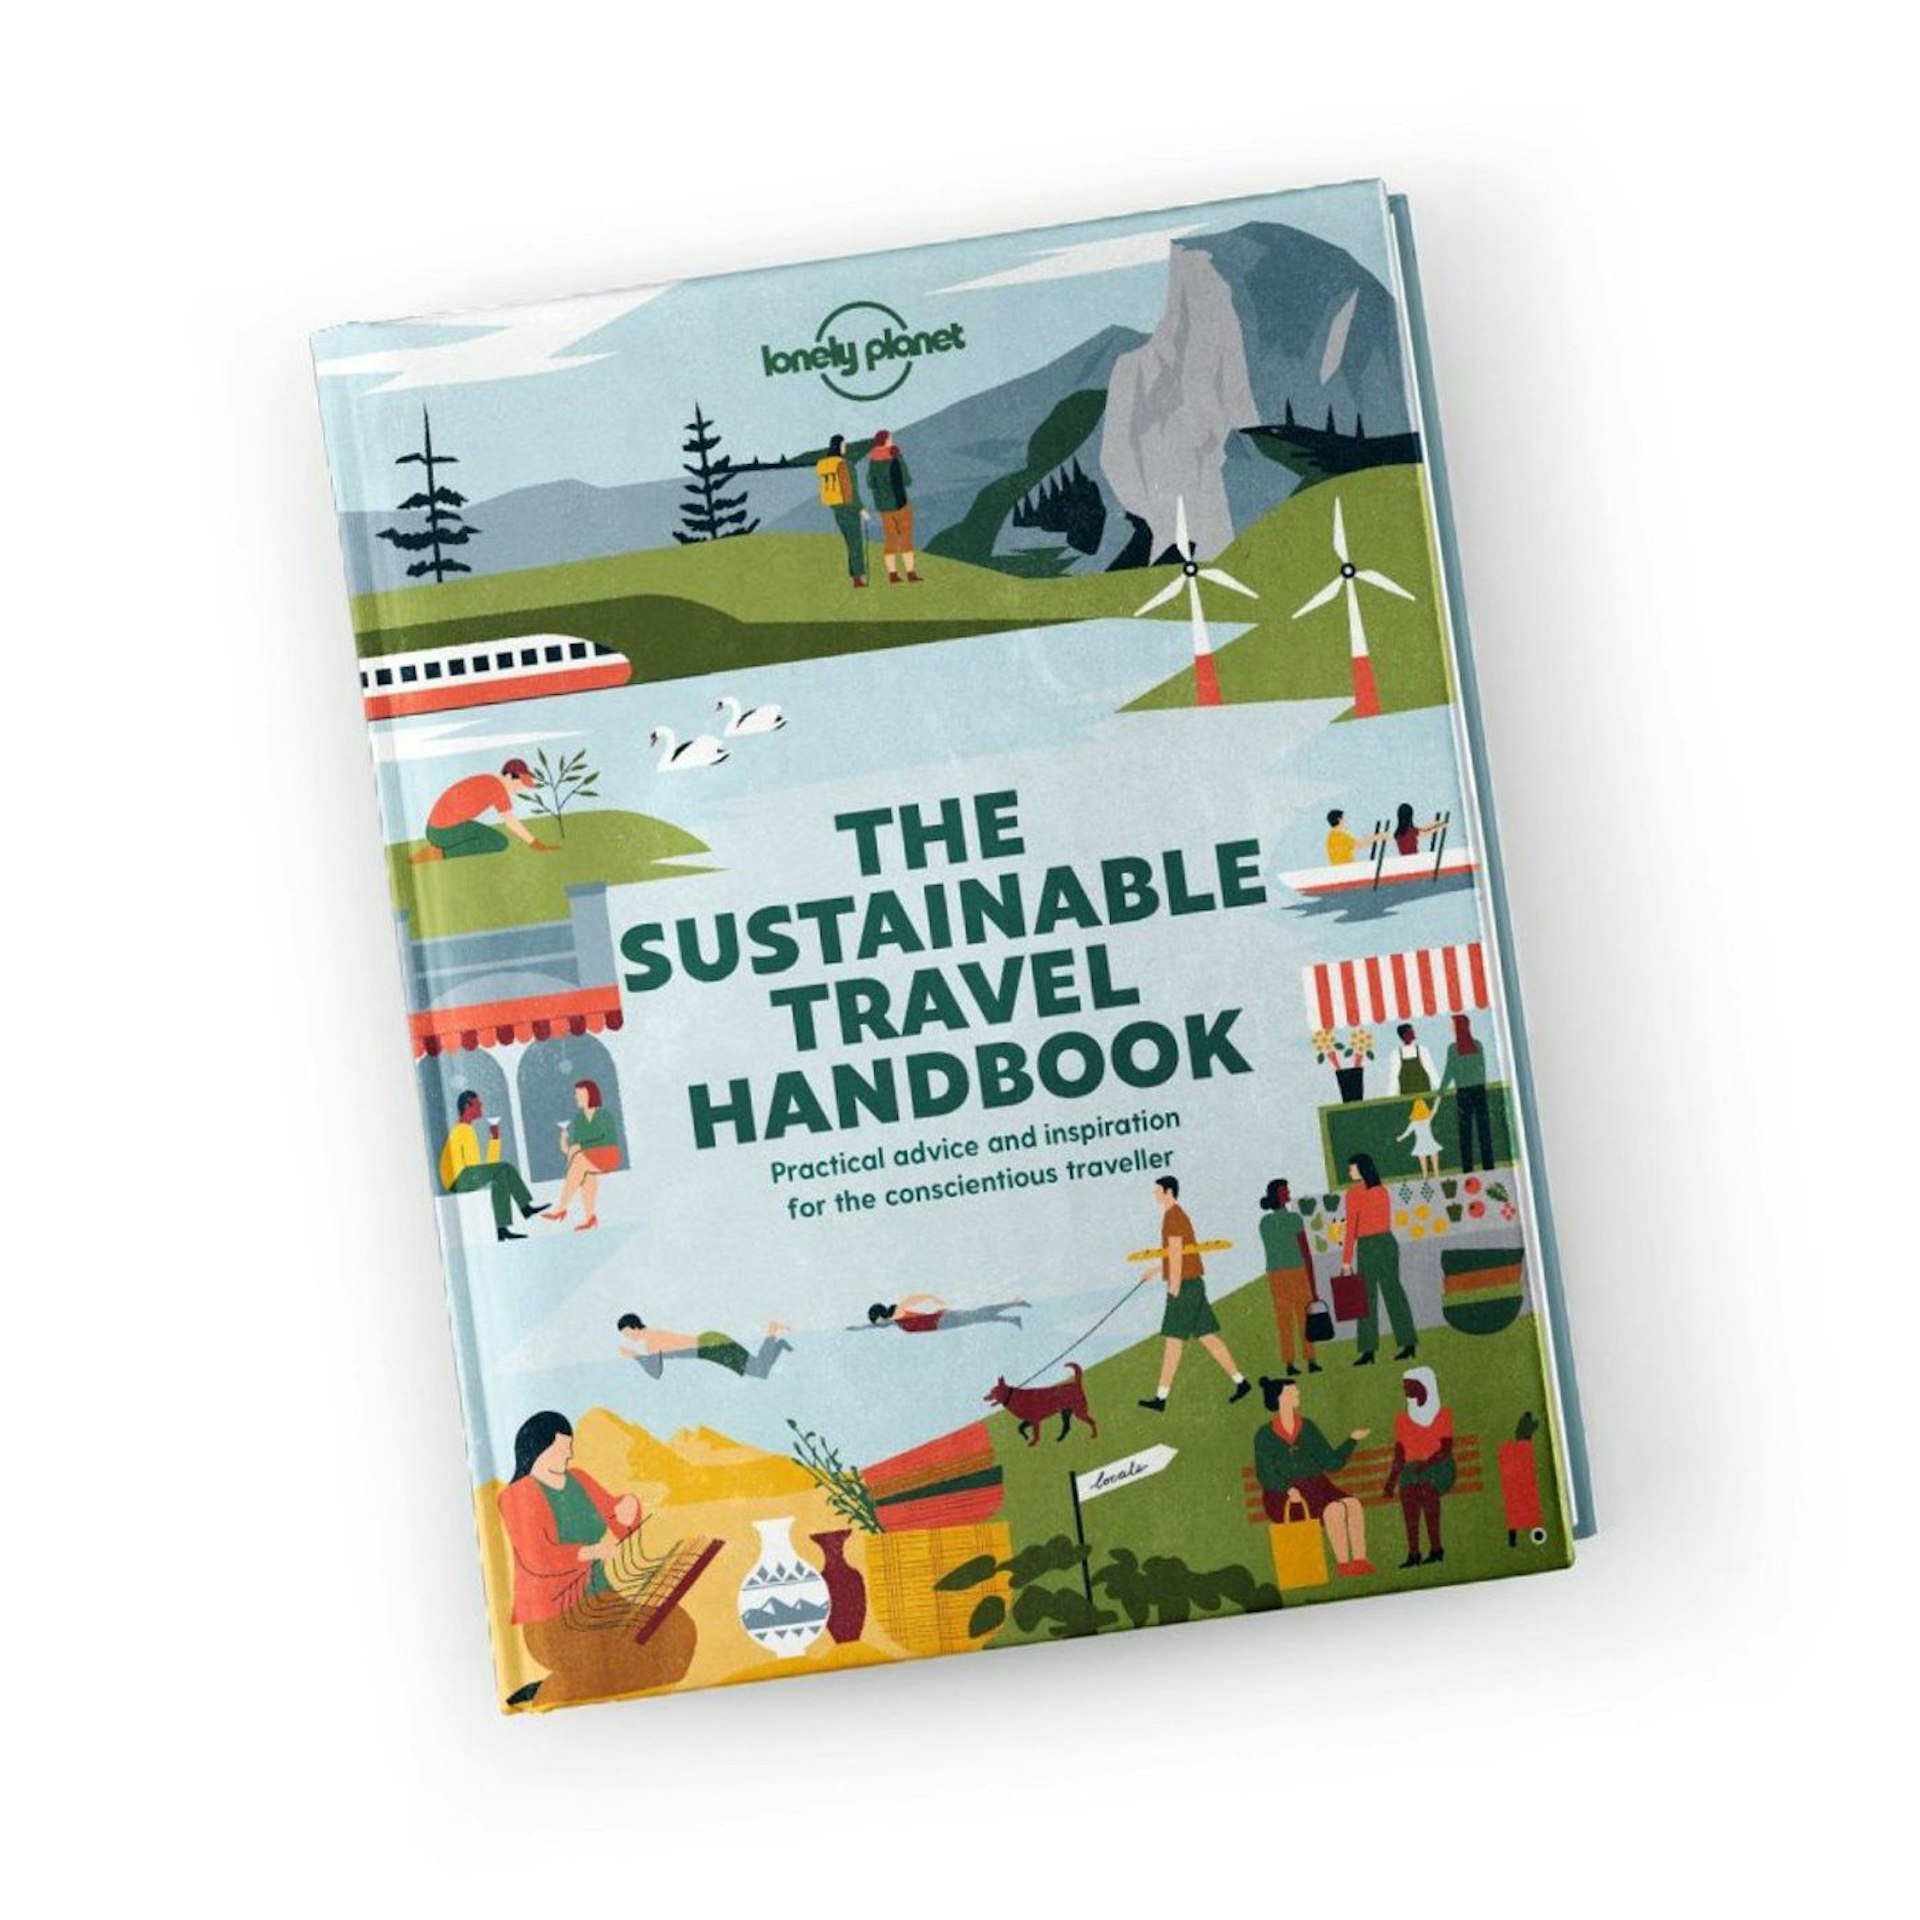 The cover of Lonely Planet's Sustainable Travel Handbook